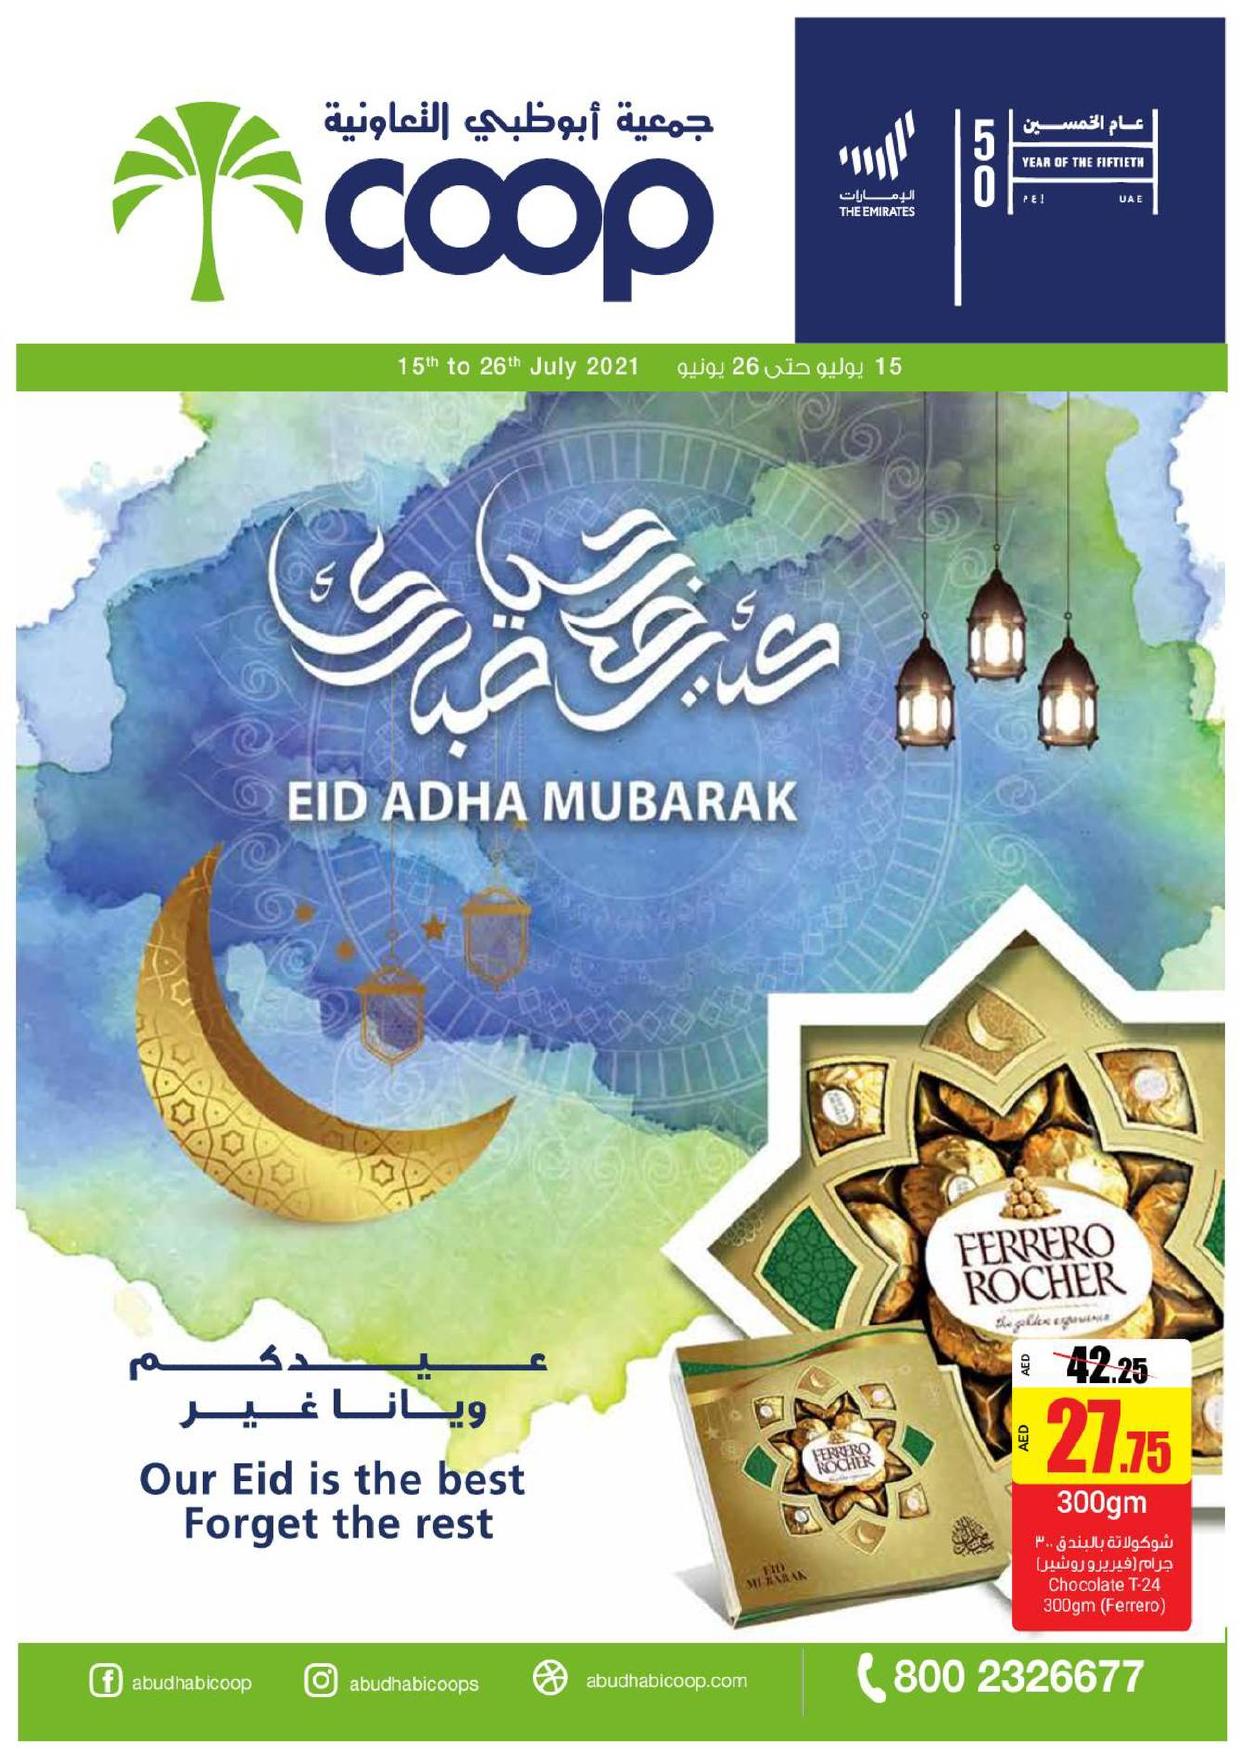 <p><font color="#424242"><span style="font-size: 18px;">﻿</span><span style="font-size: 18px;">Eid Al Adha Offers - Adcoops</span></font><br></p>